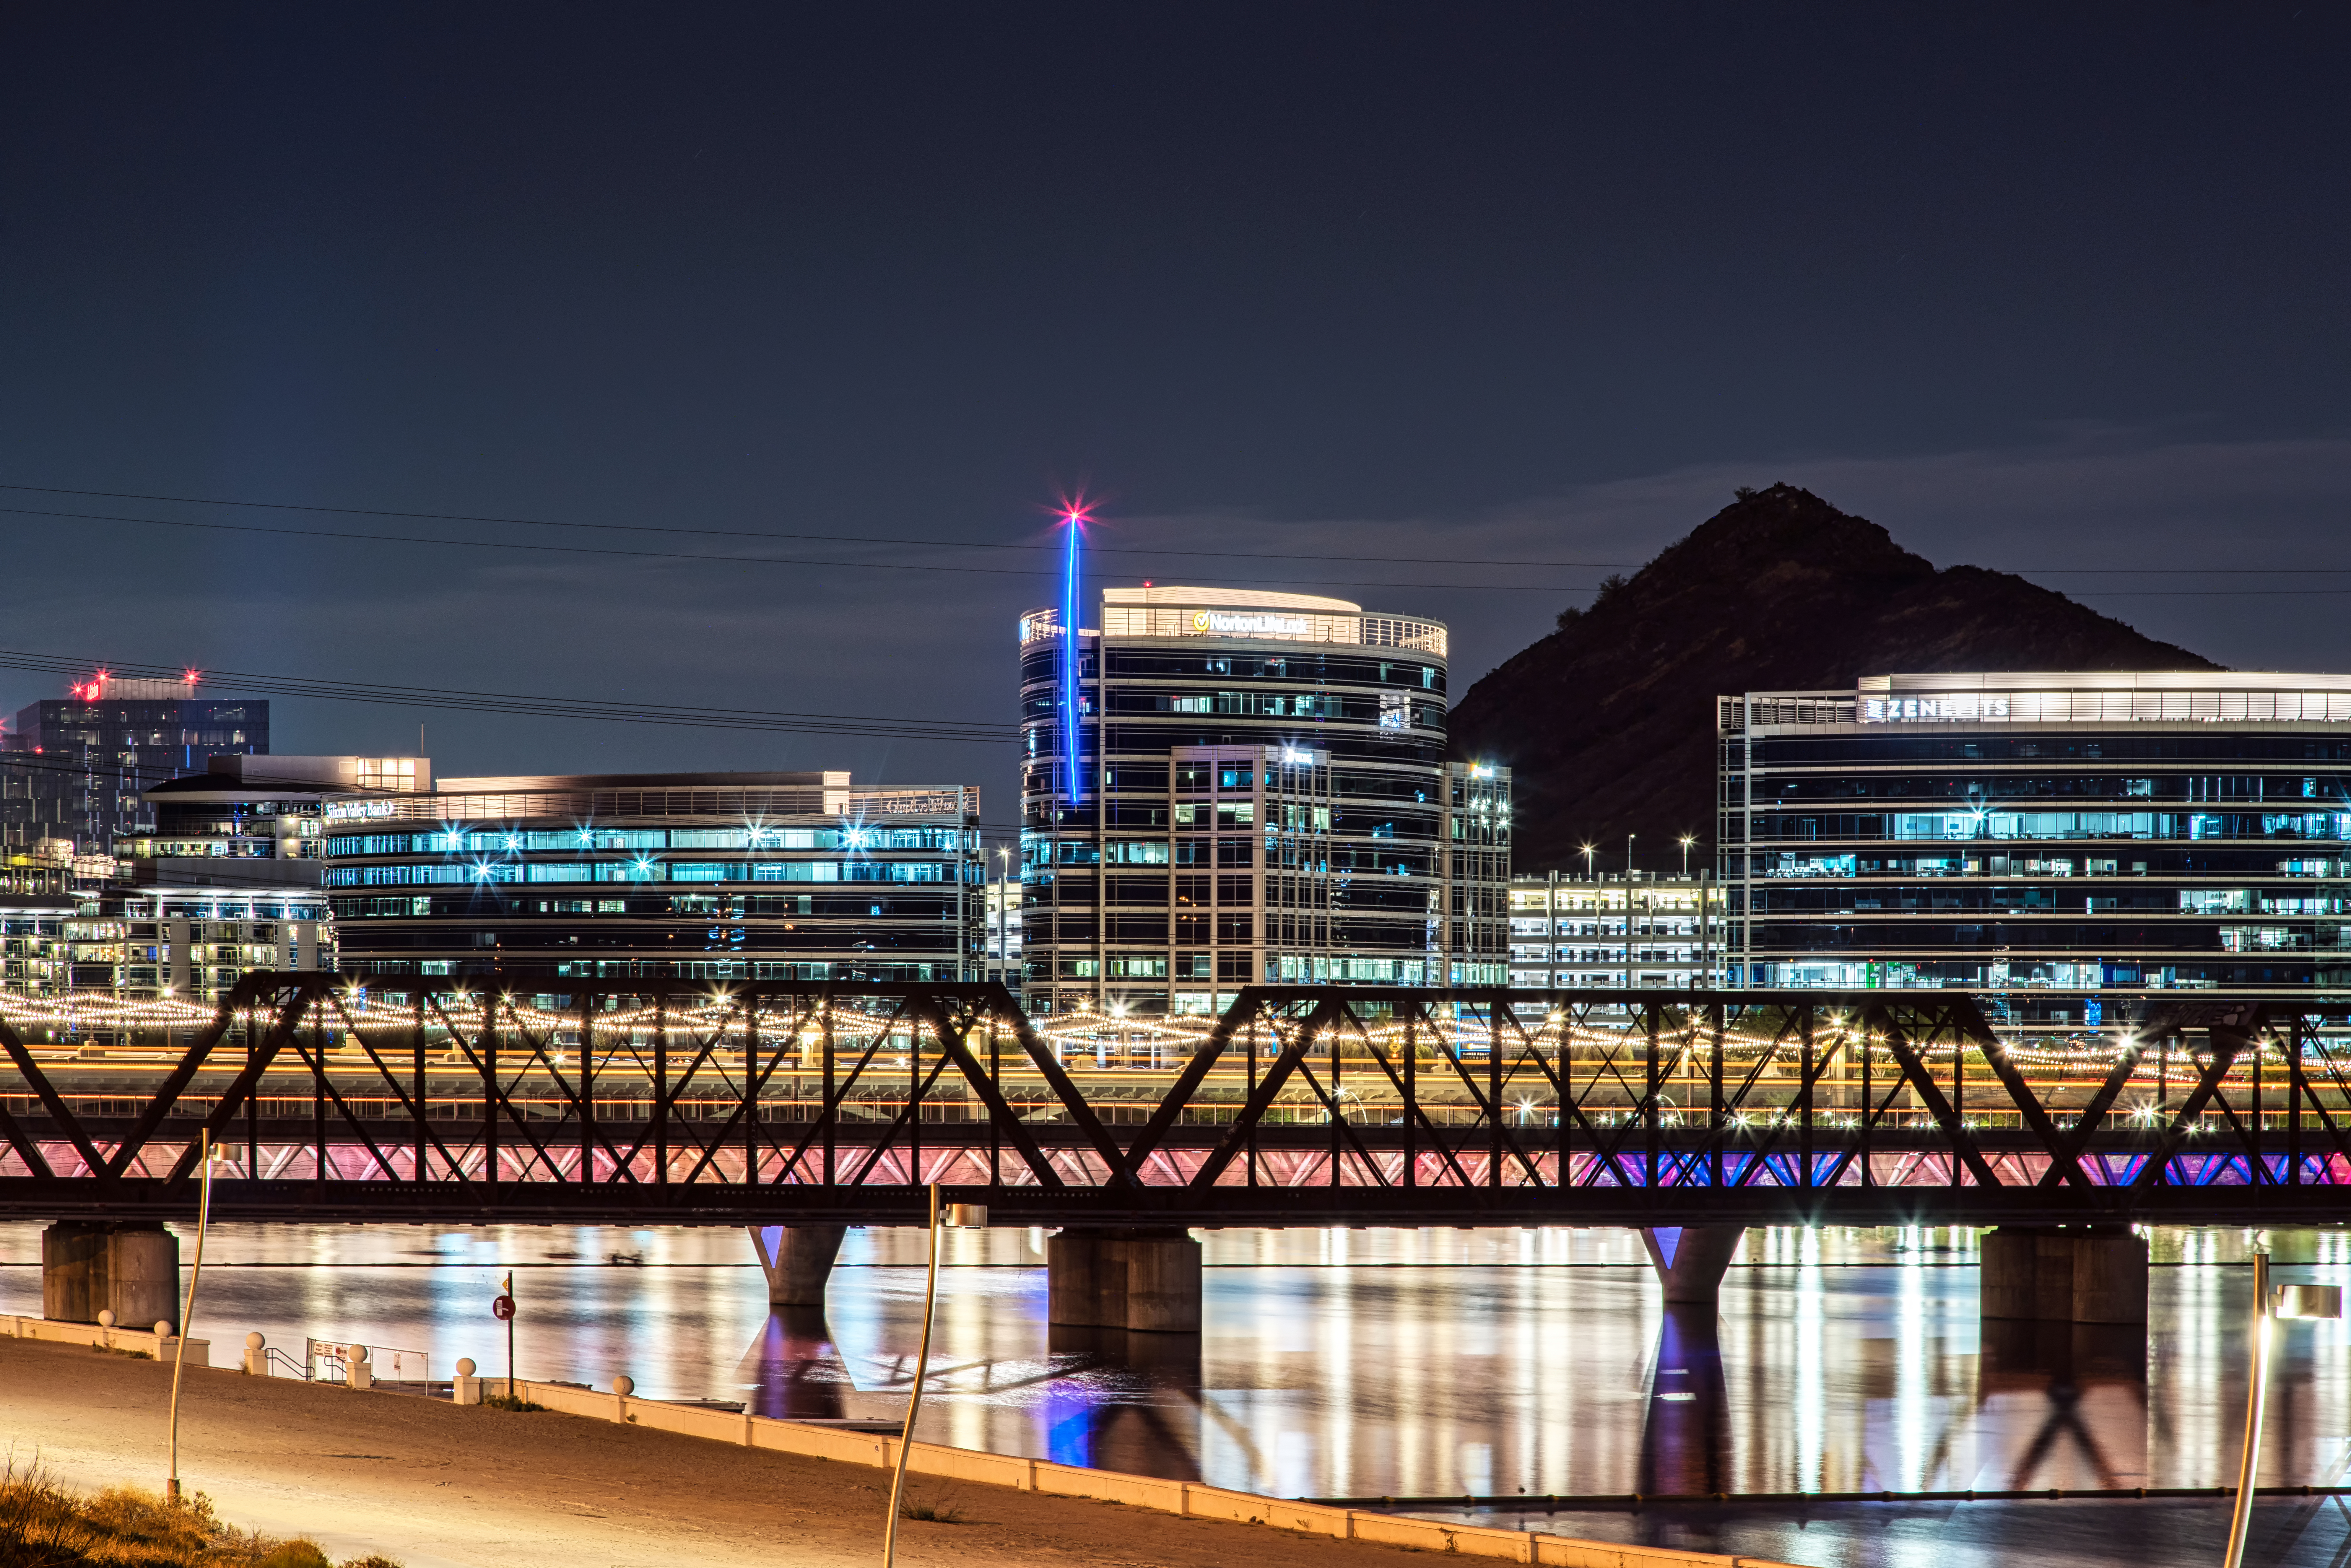 Evening view of the four bridges crossing Tempe Town Lake in Tempe, Arizona.